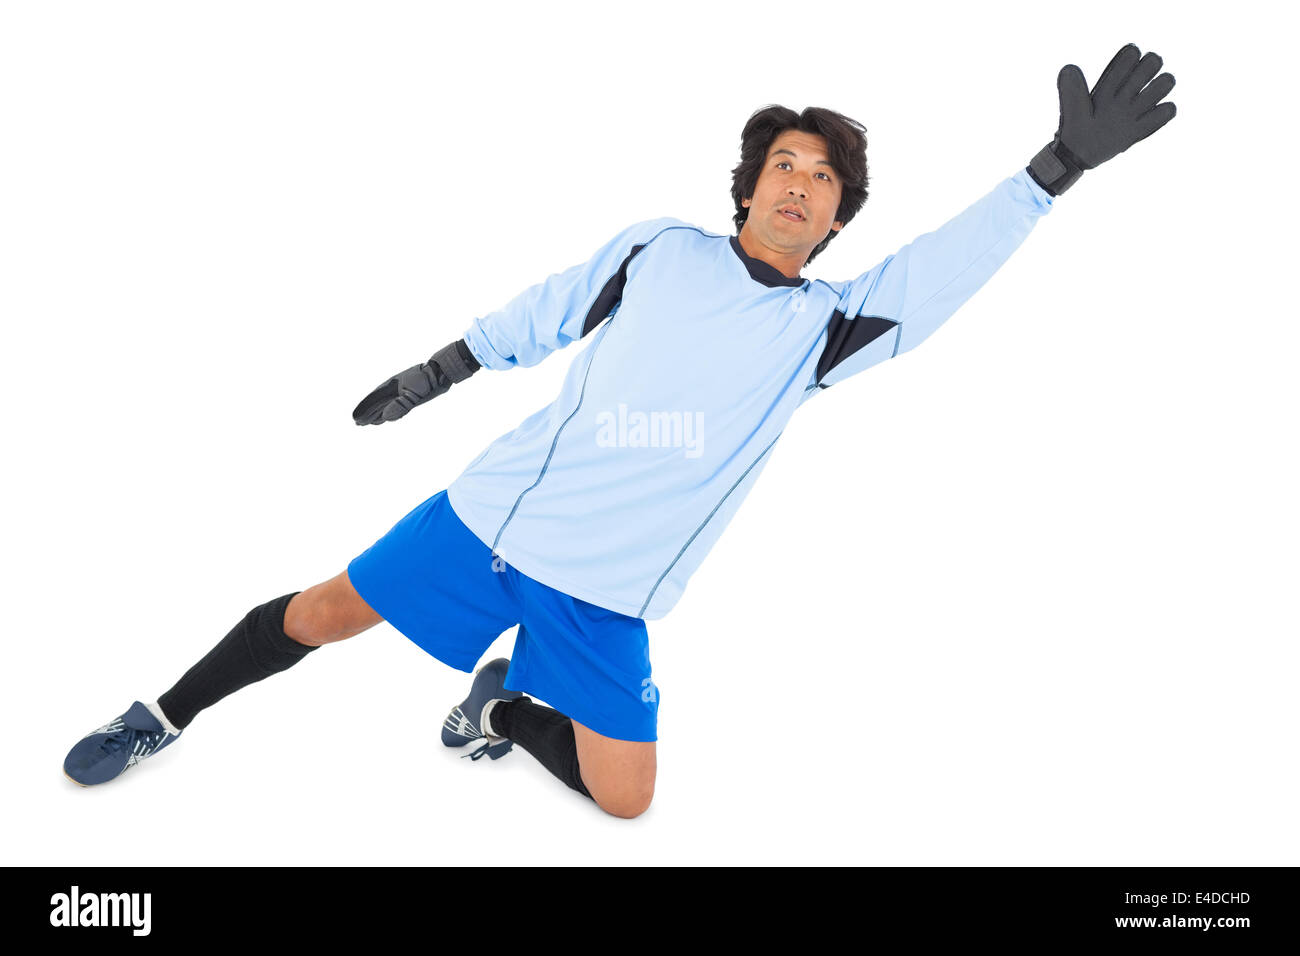 Goalkeeper in blue making a save Stock Photo